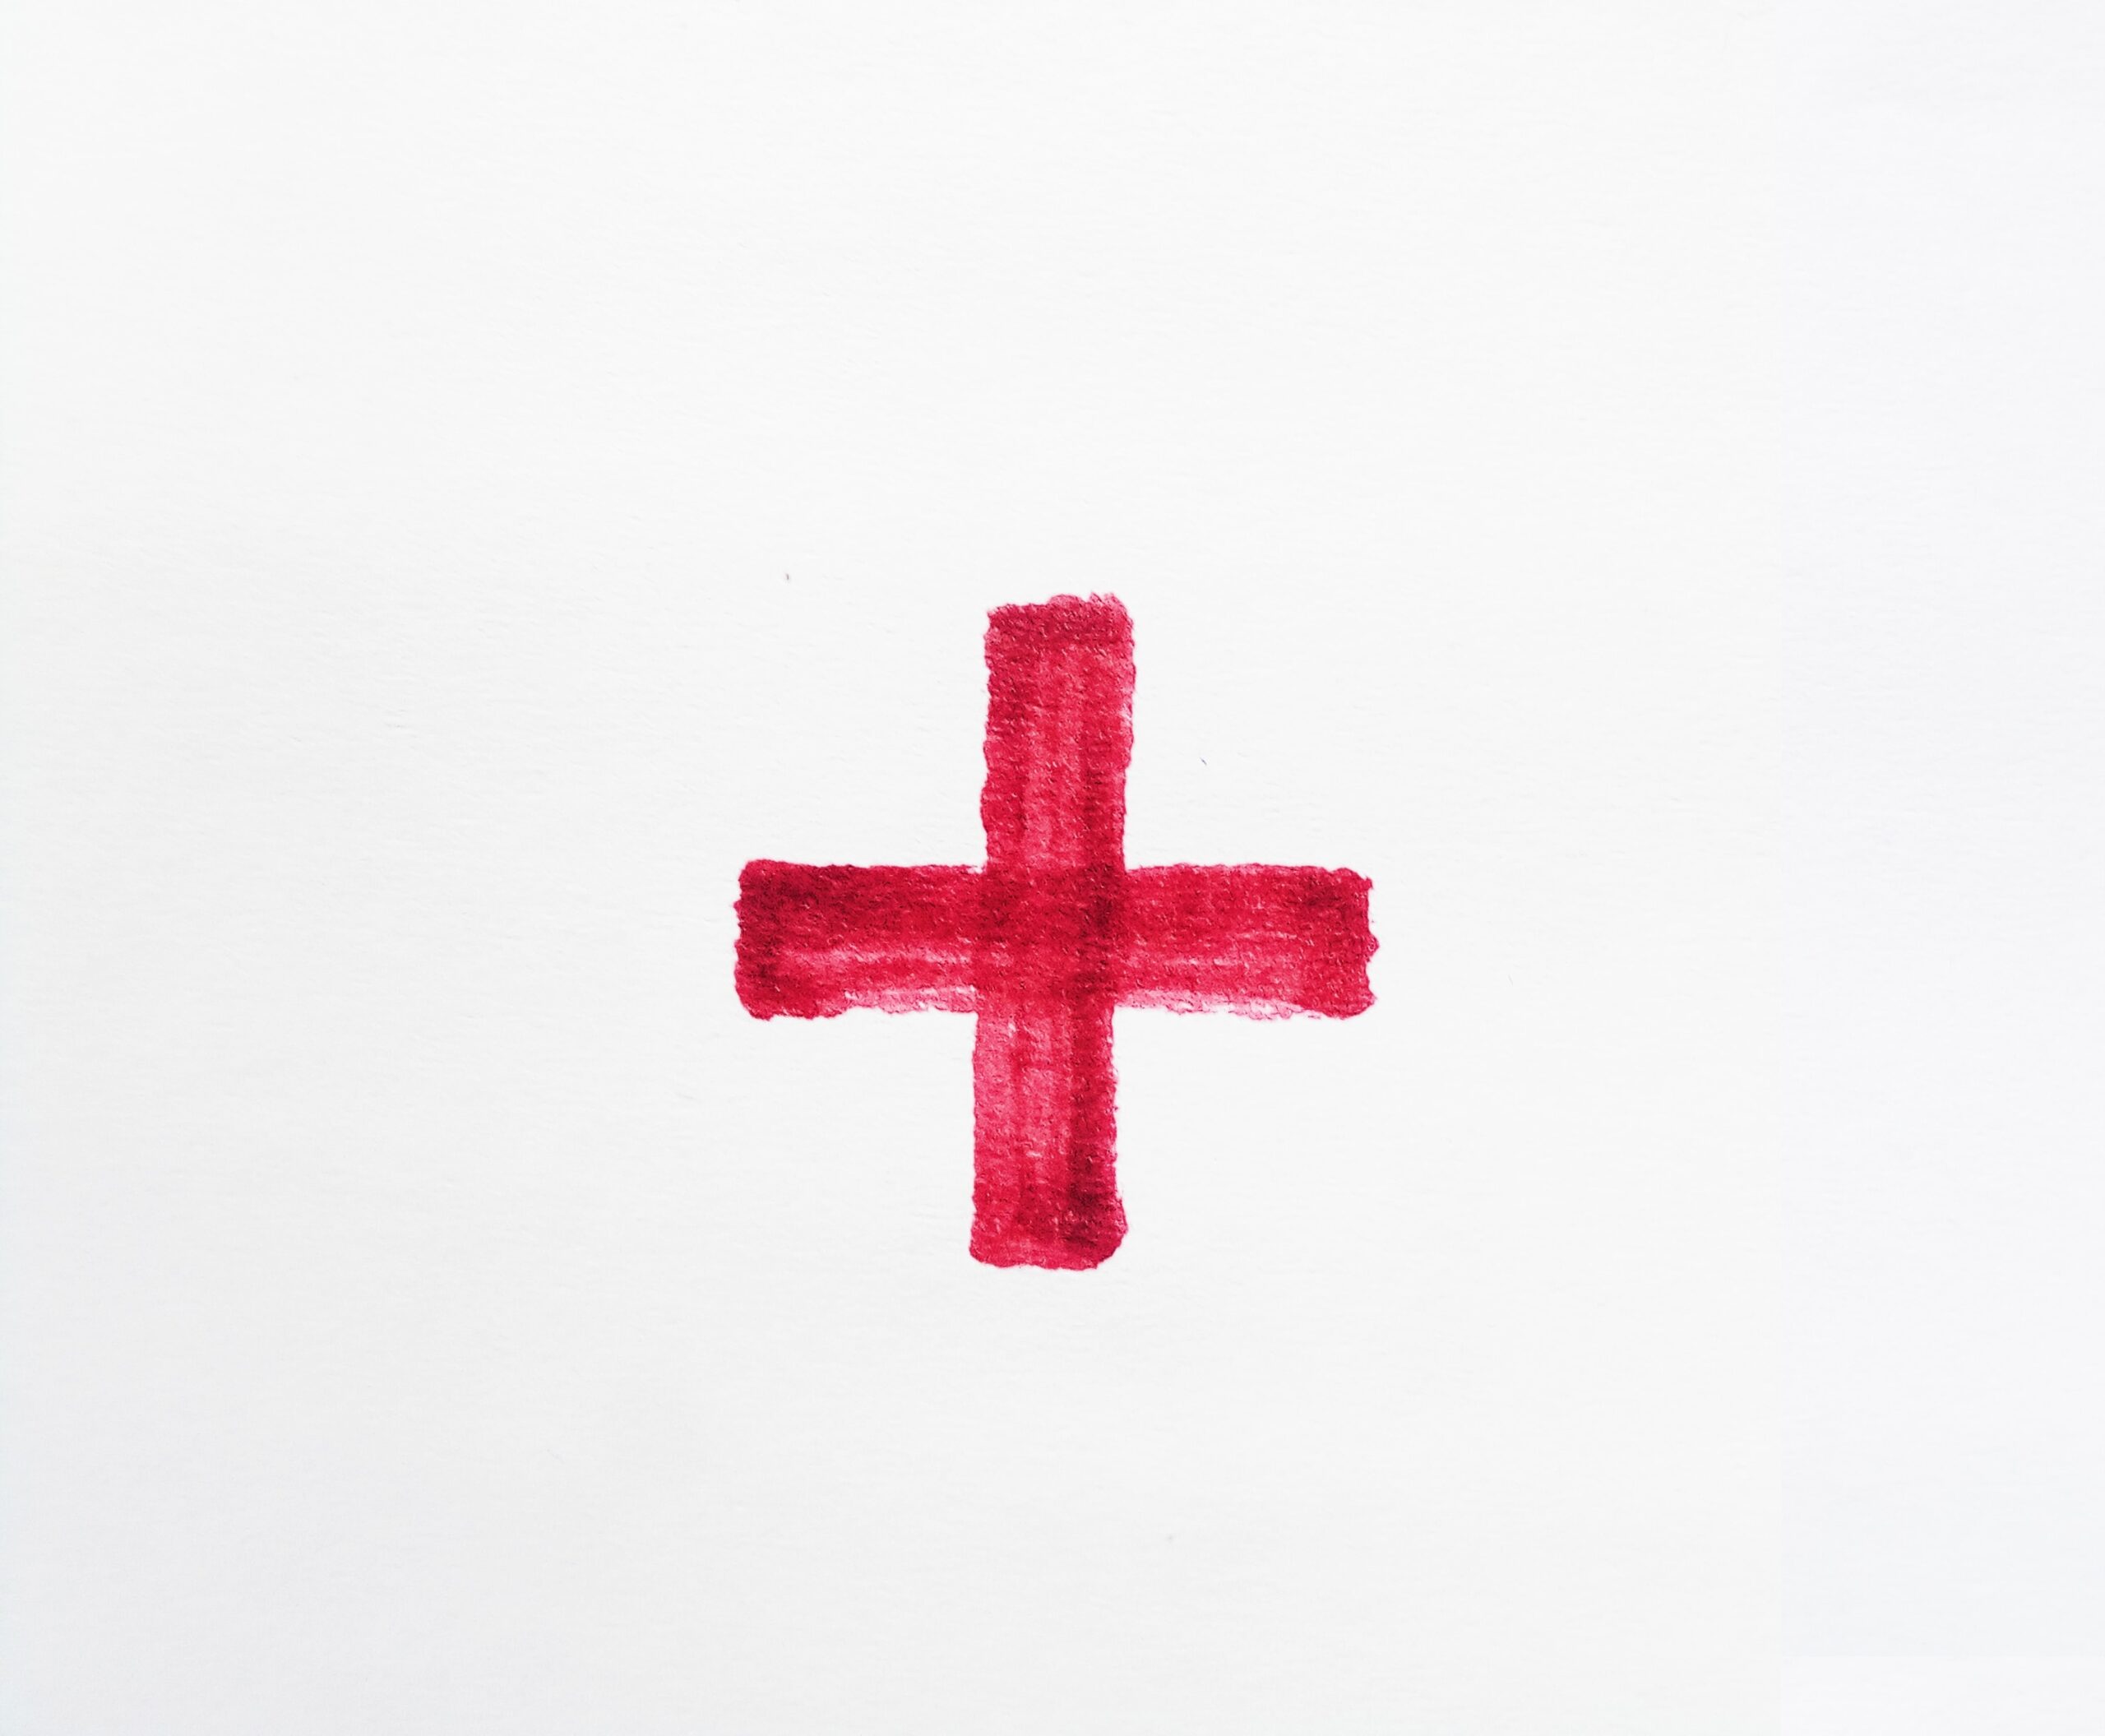 A hand painted first aid cross